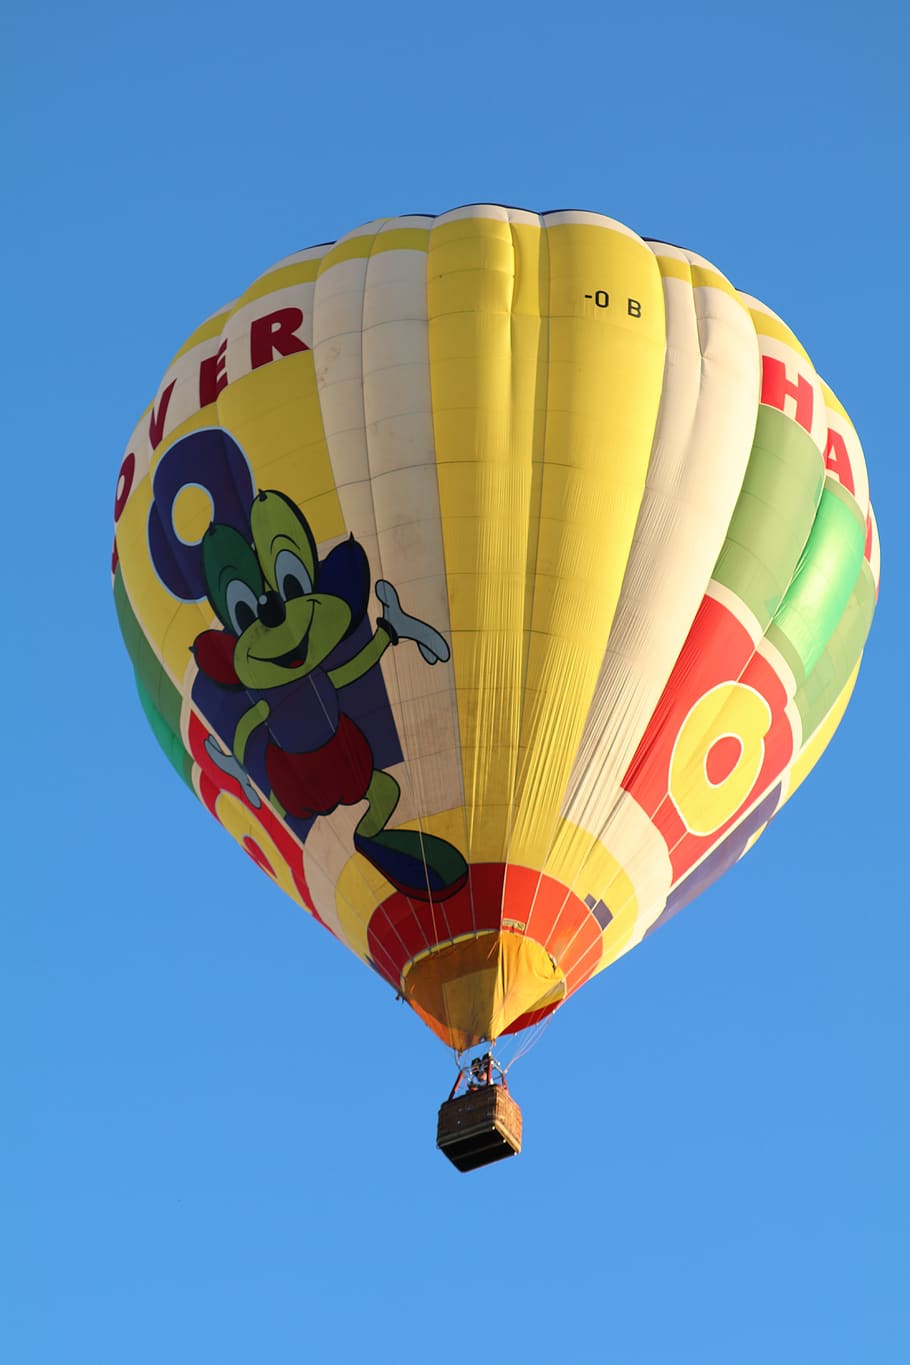 balloon, flying, travel, lifting, colorful, adventure, skies, wind, hot air balloon, sky